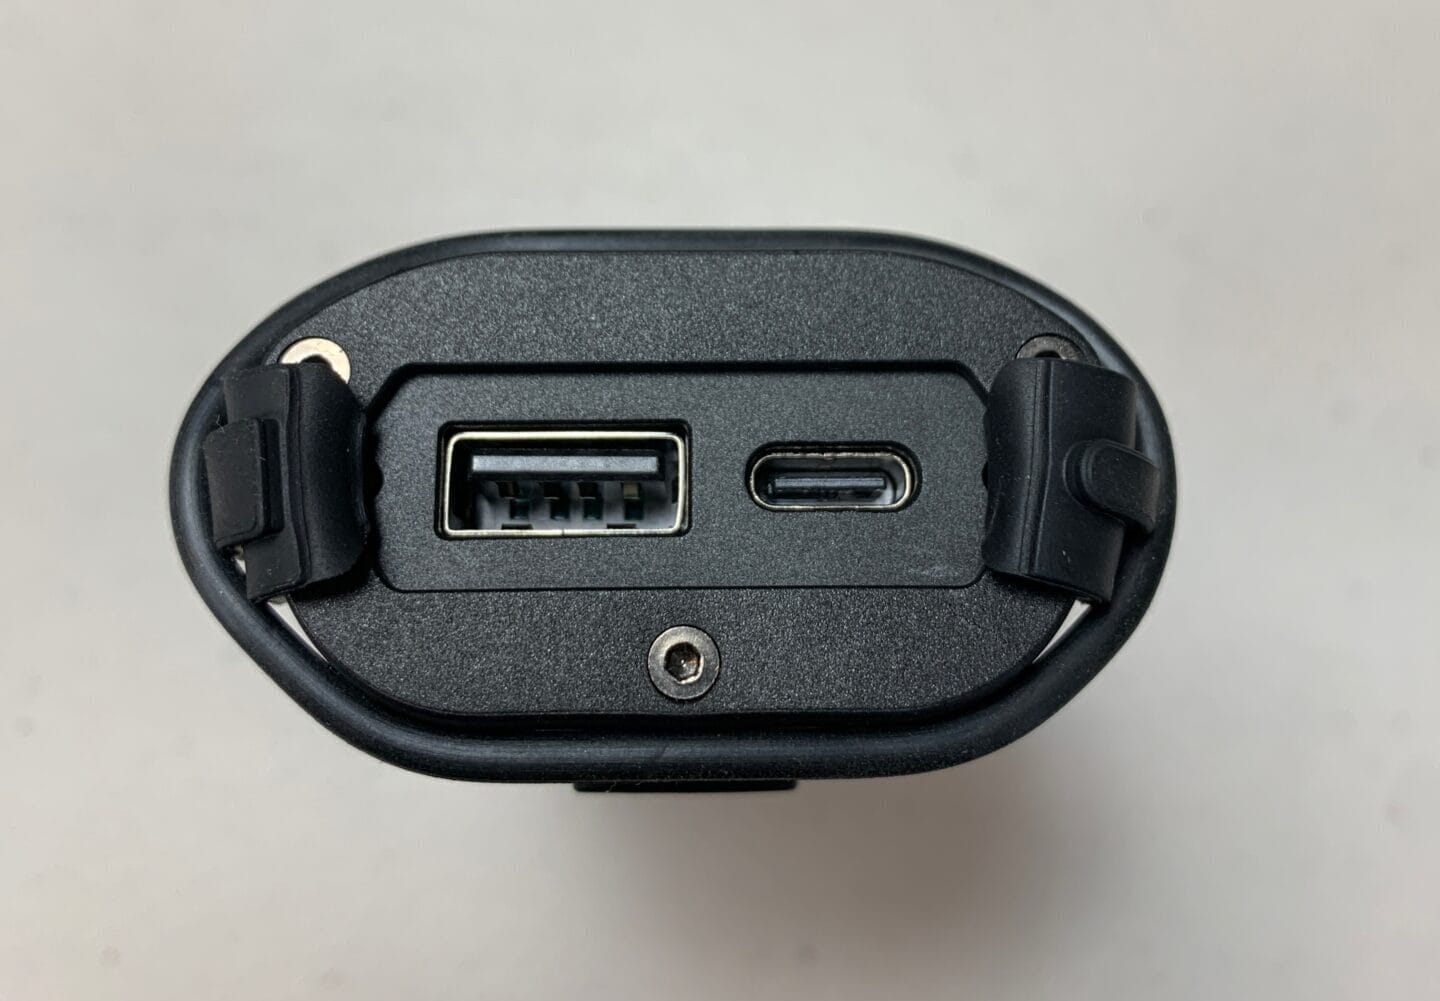 Backside of the Ravemen PR2000 with the usb Ports uncovered